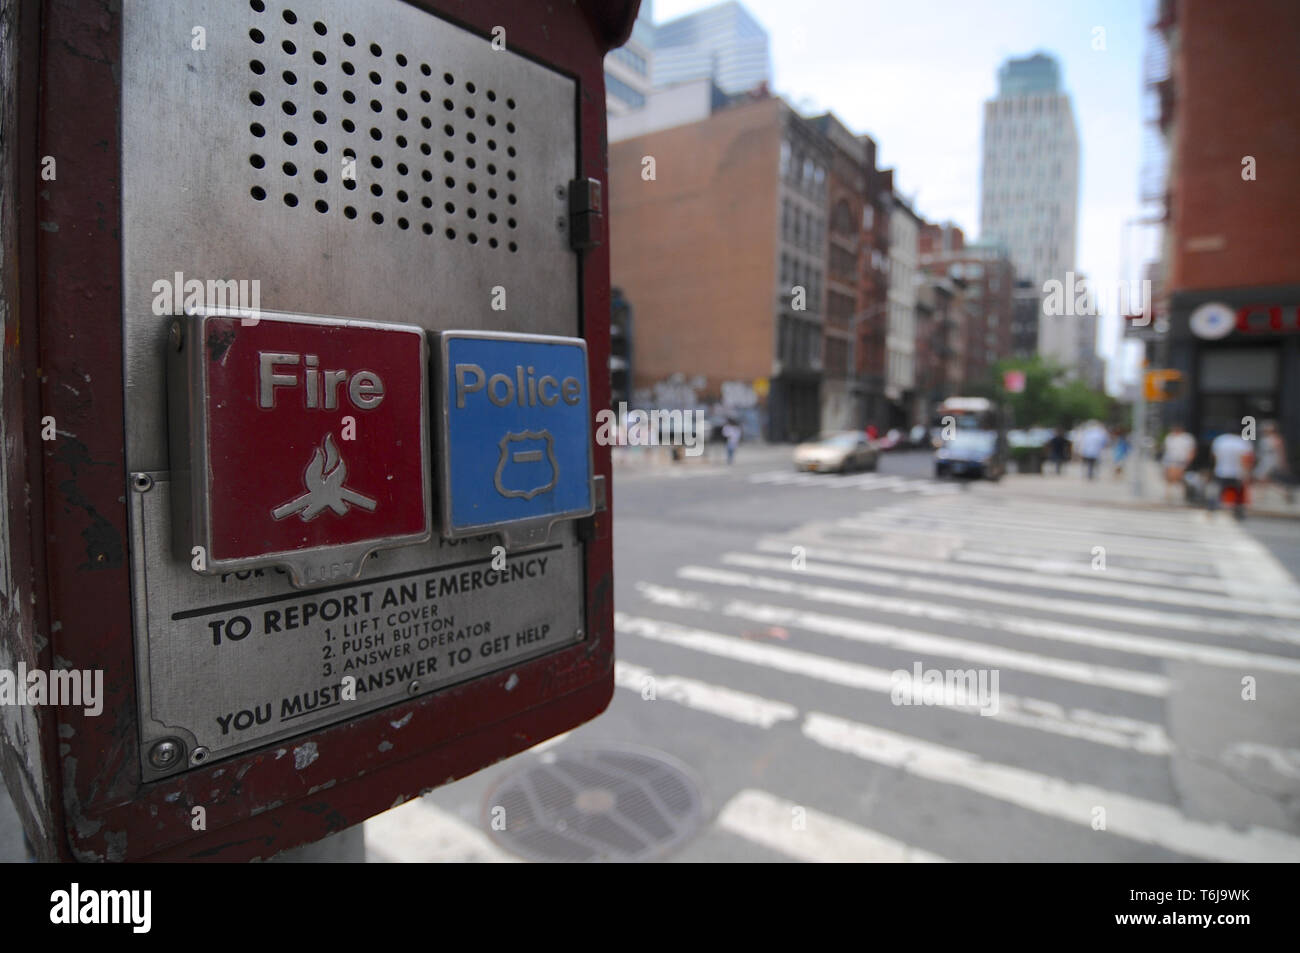 Brooklyn, New York City, USA : 14th July 2014 : Close up picture of a Fire and Police Emergency call box with some buildings in the background located Stock Photo